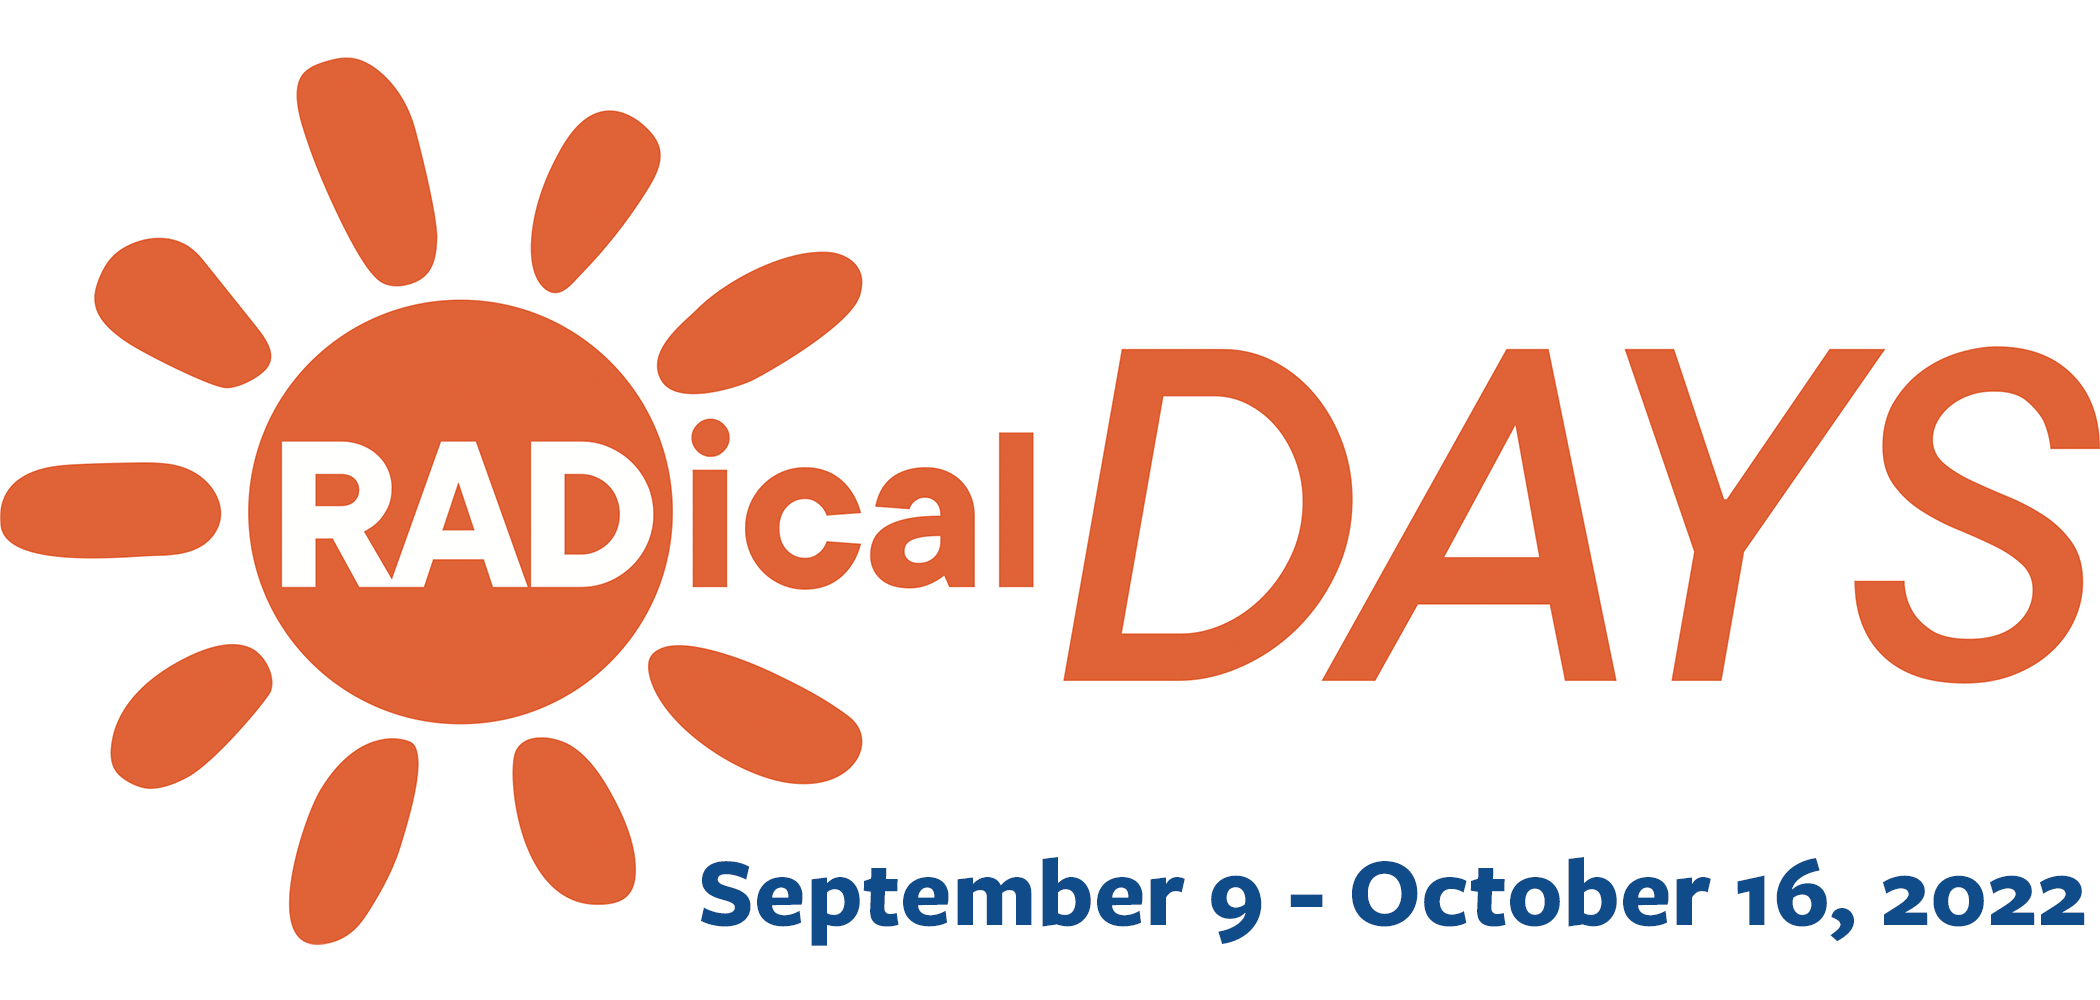 RADical Days logo in colors orange and white